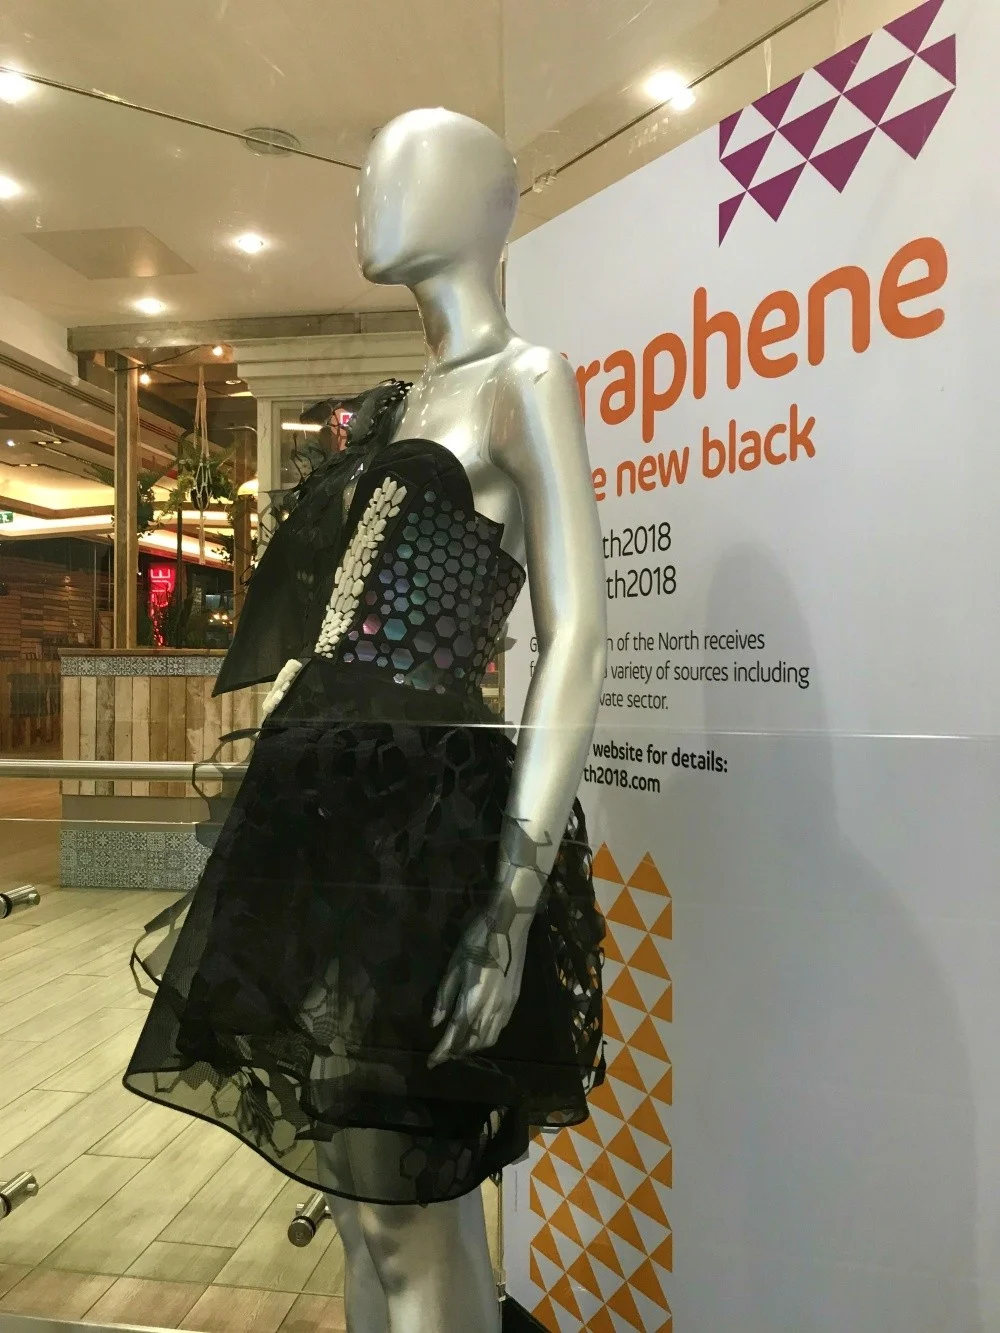 Graphine Dress - Great Exhibition of the North Newcastle Photo Heatheronhertravels.com